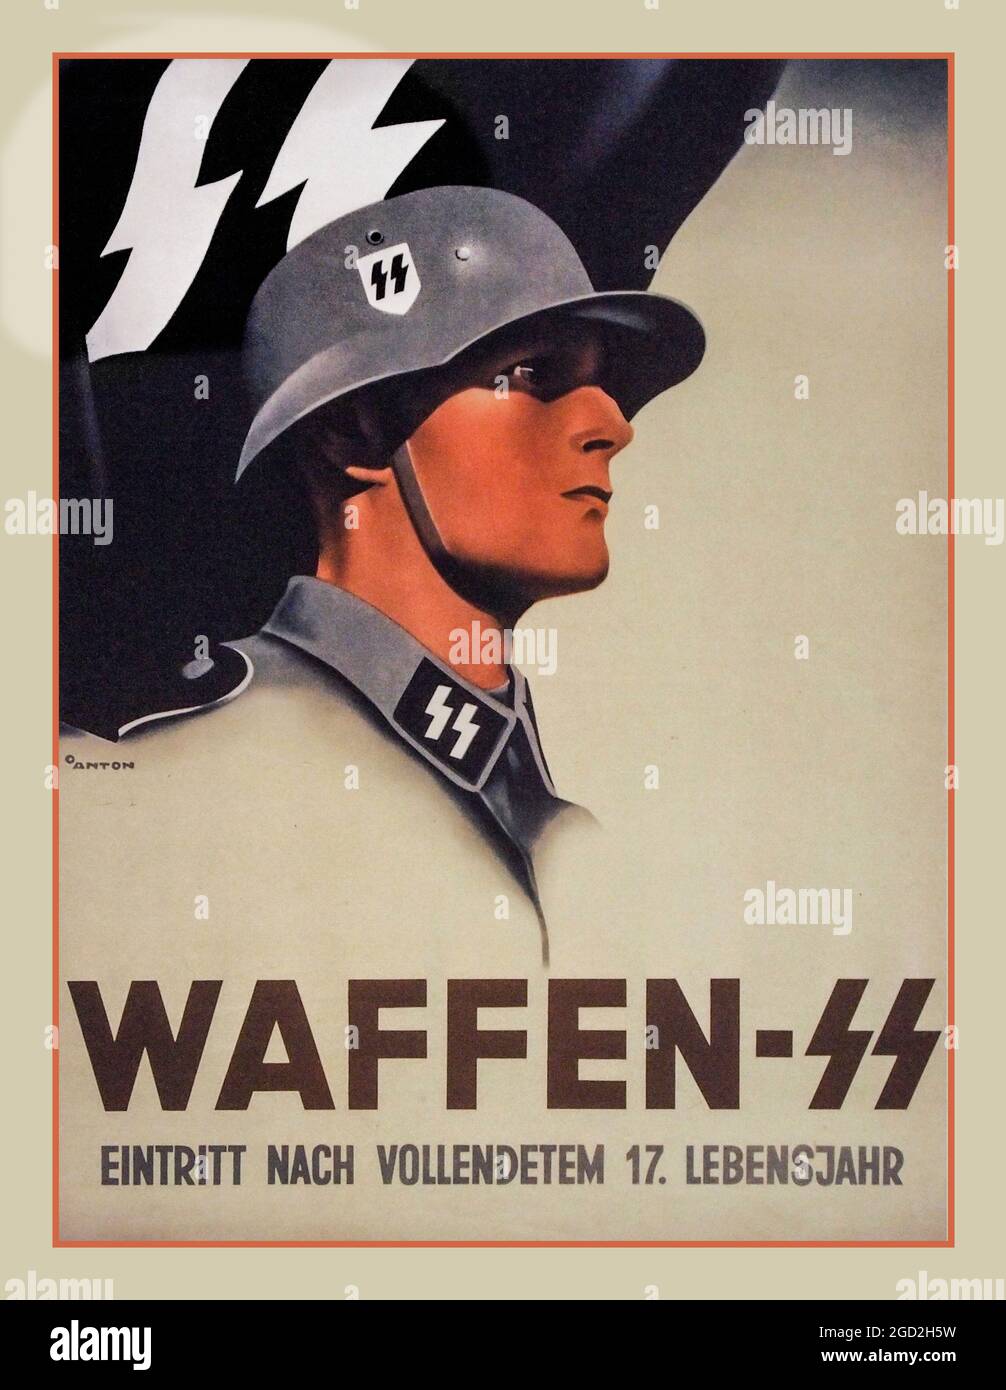 WAFFEN SS WW2 PROPAGANDA POSTER 1940's German wartime propaganda recruitment poster for the notorious brutal Nazi Waffen SS German recruitment poster, printed by Obpacher AG, Munich, 1940 (colour litho) Stock Photo